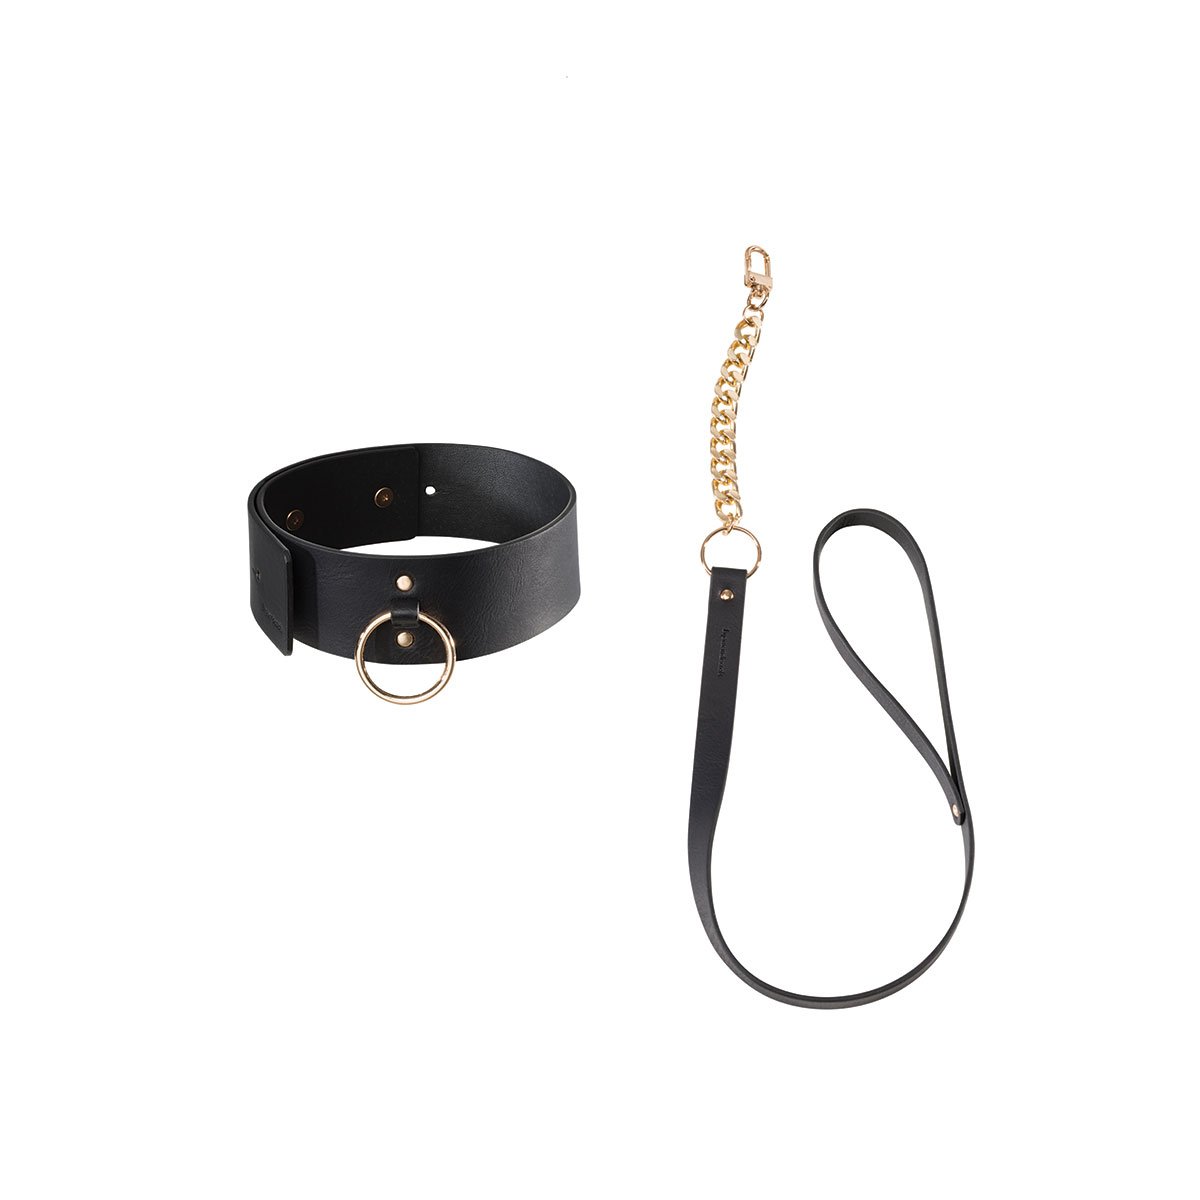 Bijoux Indiscrets Maze Choker & Leash - Buy At Luxury Toy X - Free 3-Day Shipping